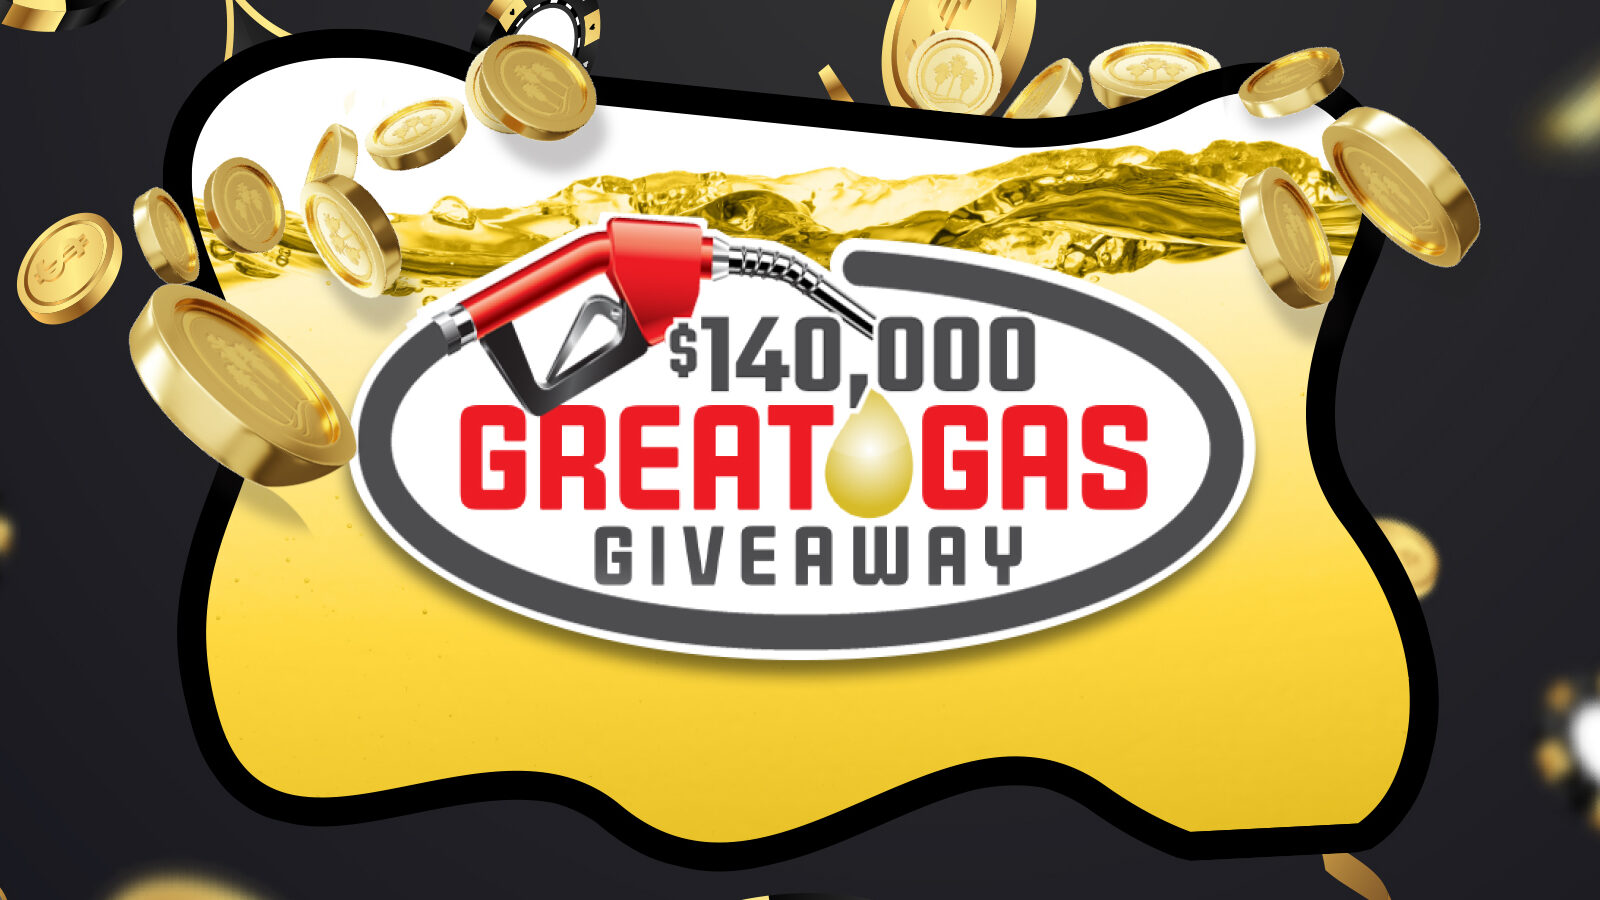 $140,000 Great Gas Giveaway